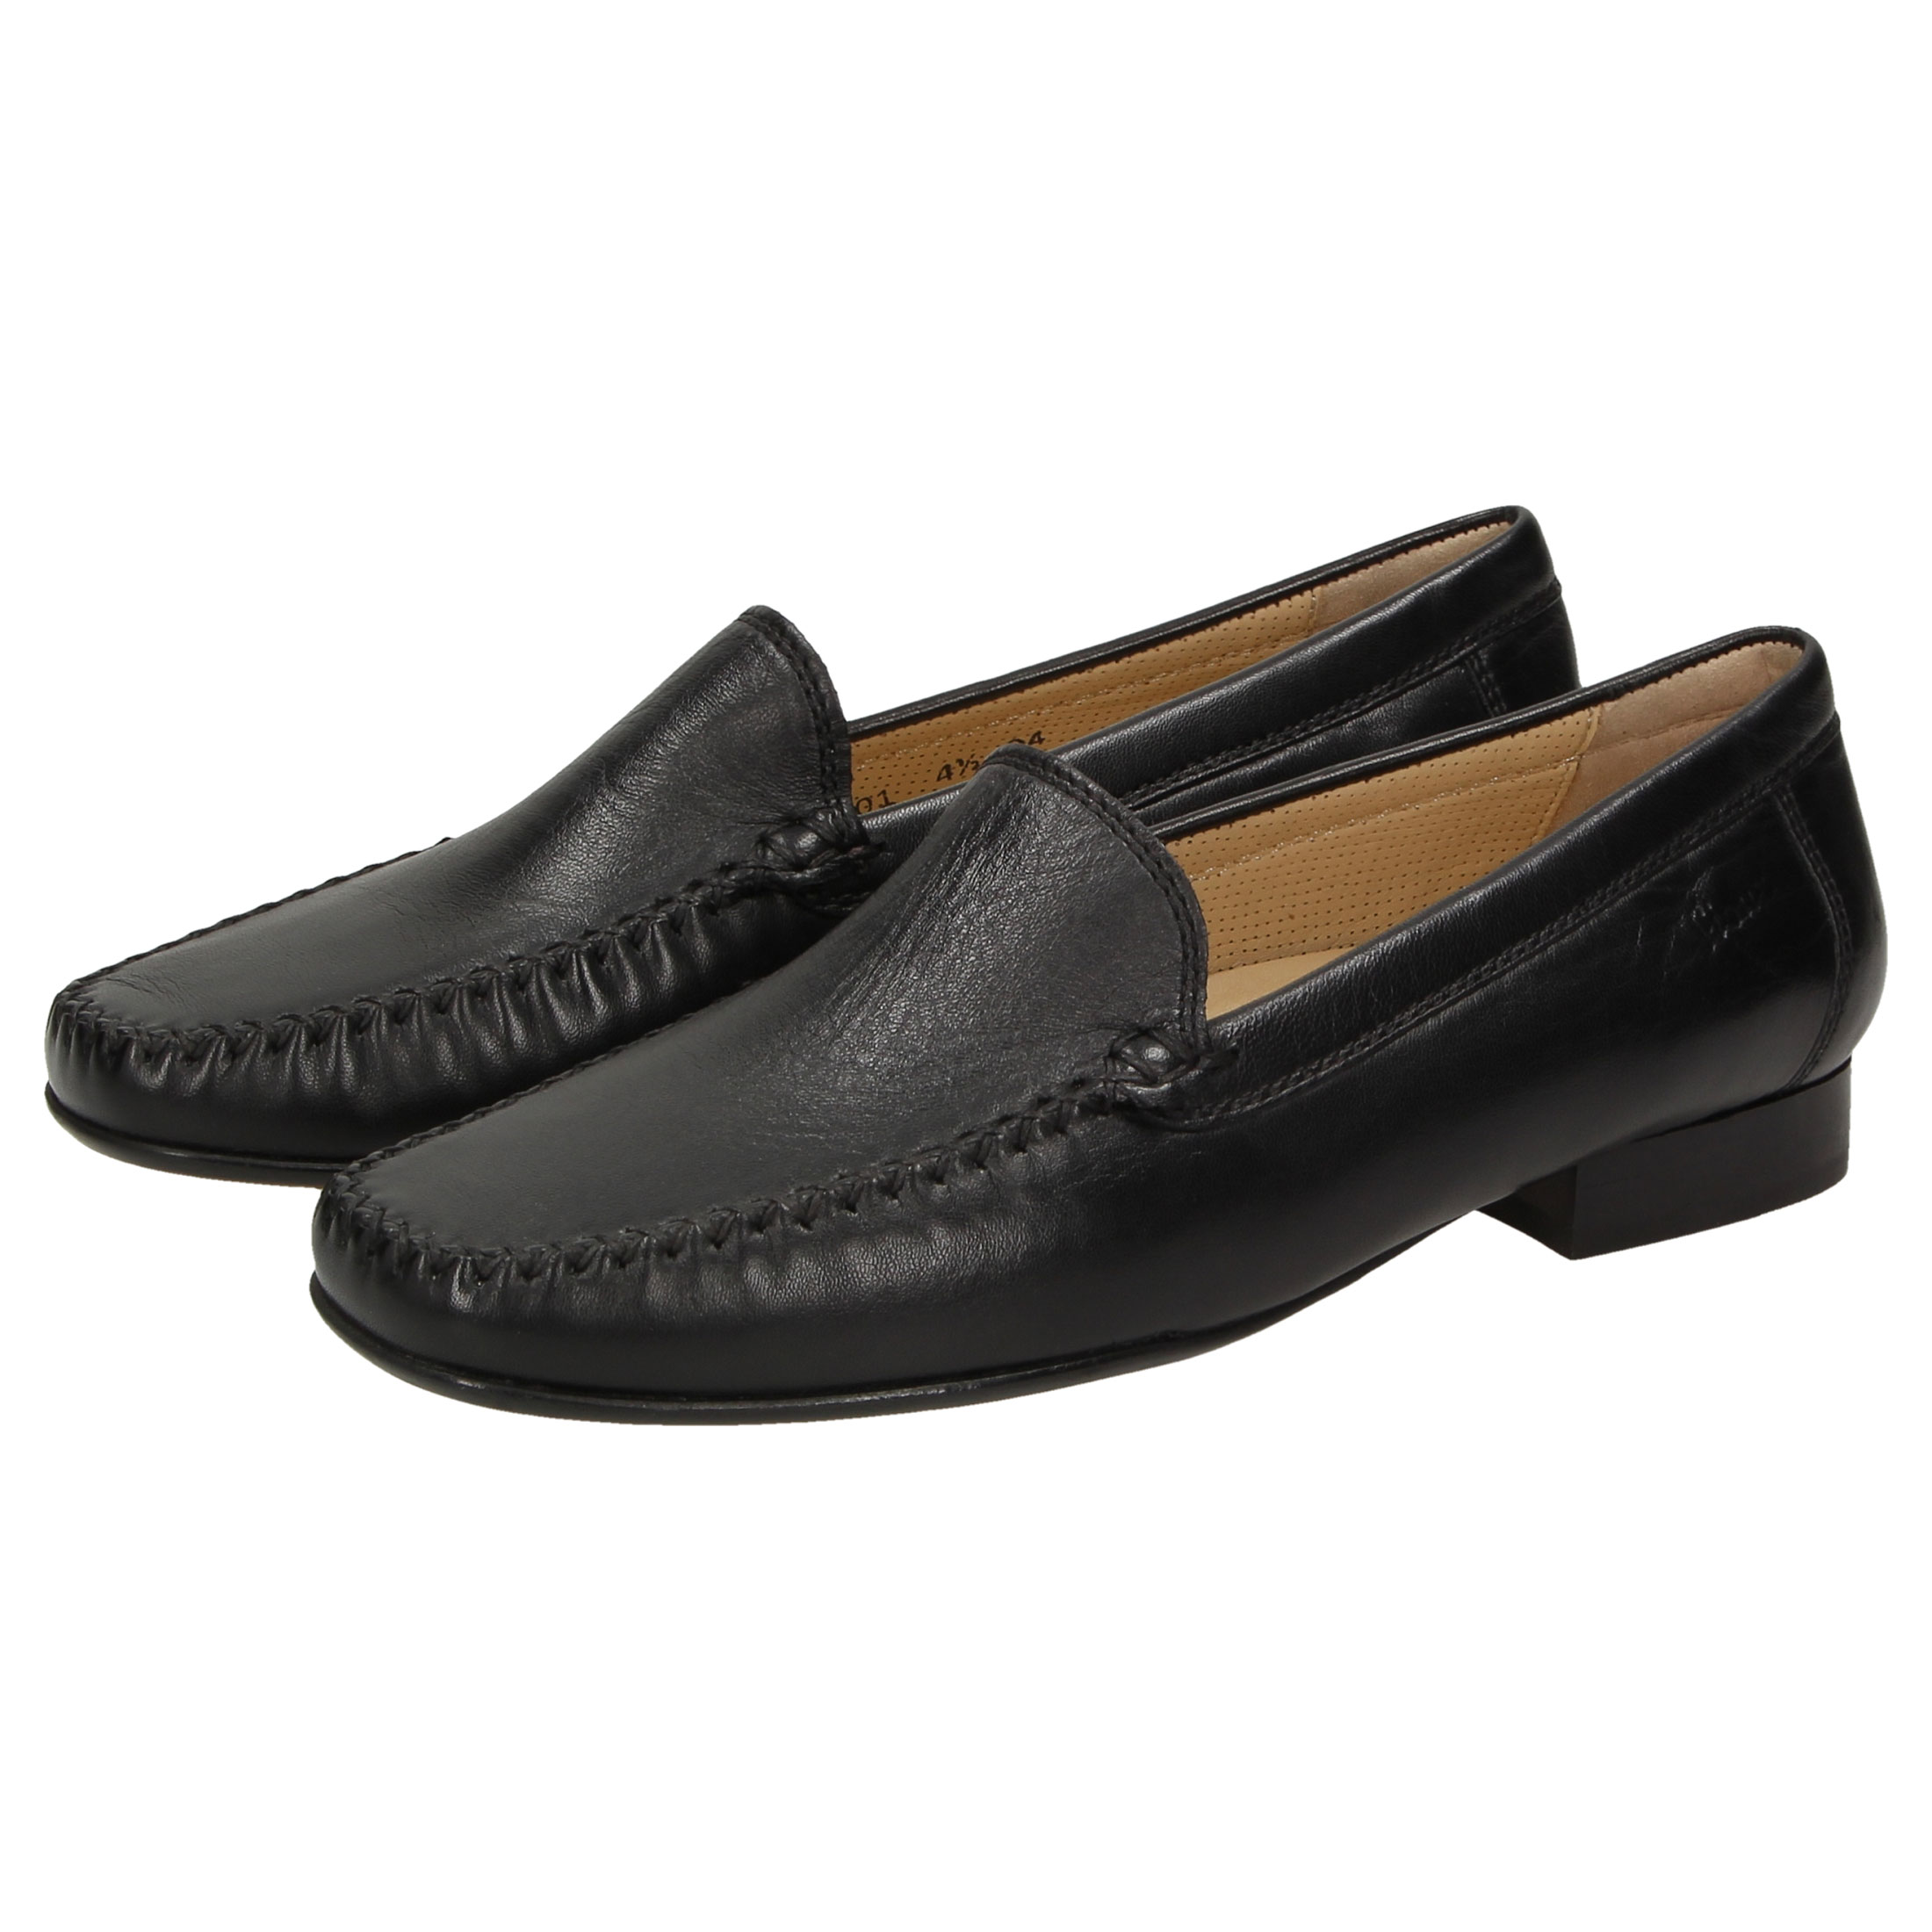 Sioux Campina - Black smooth leather